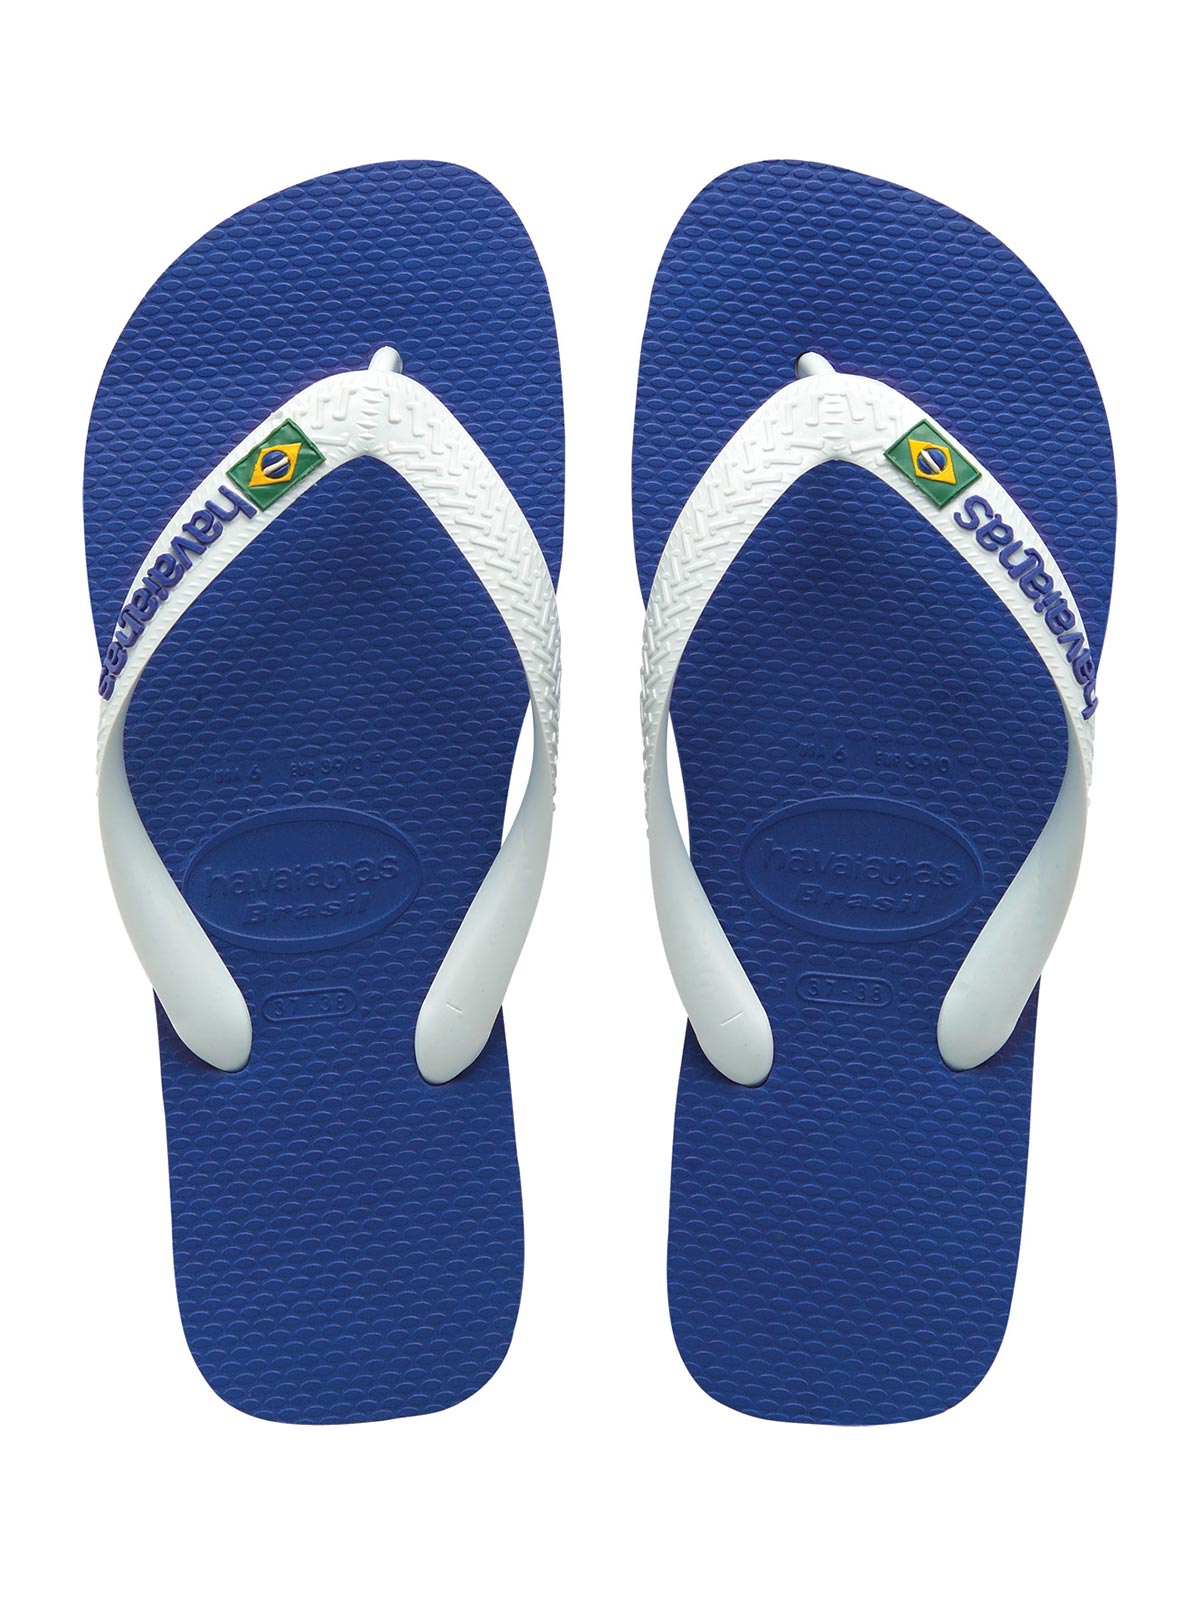 Blue And White Flip Flops From Havaianas  With Logo 